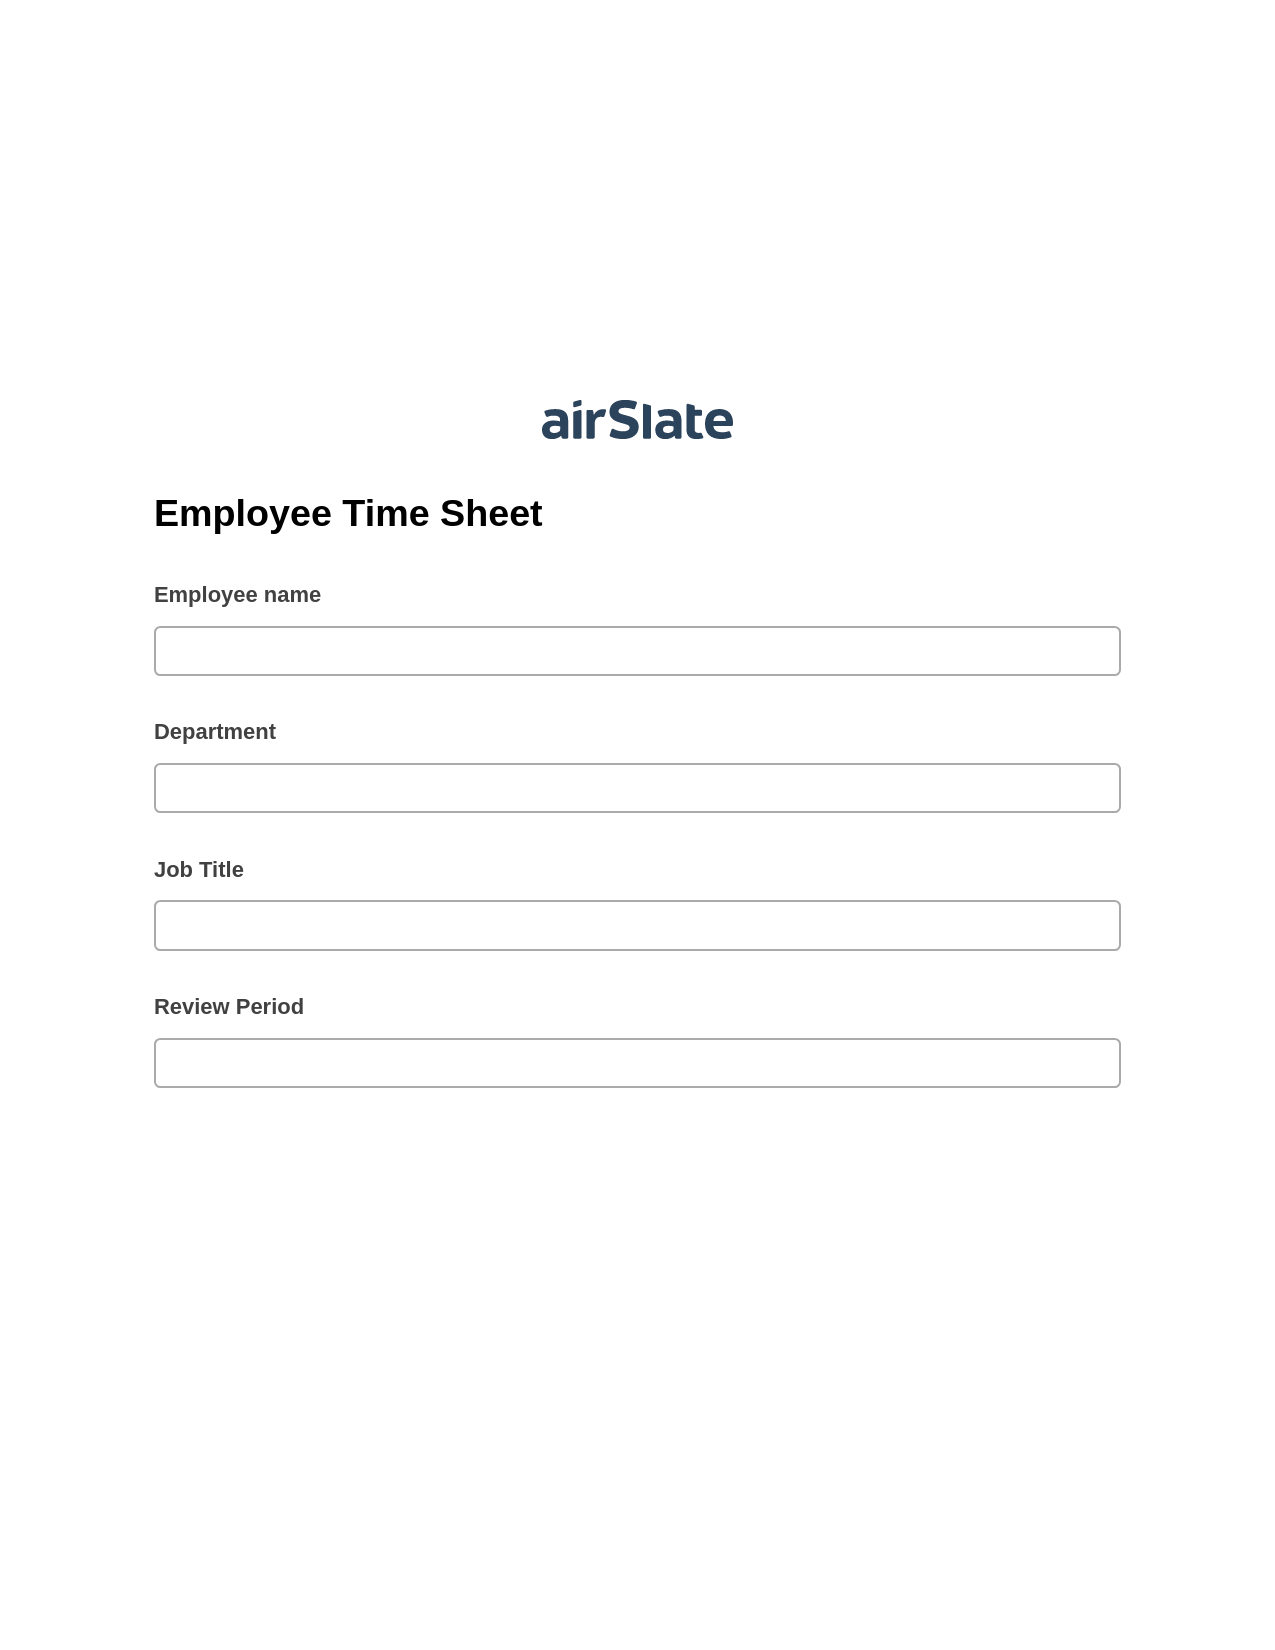 Multirole Employee Time Sheet Pre-fill from Office 365 Excel Bot, Create Salesforce Records Bot, Archive to SharePoint Folder Bot